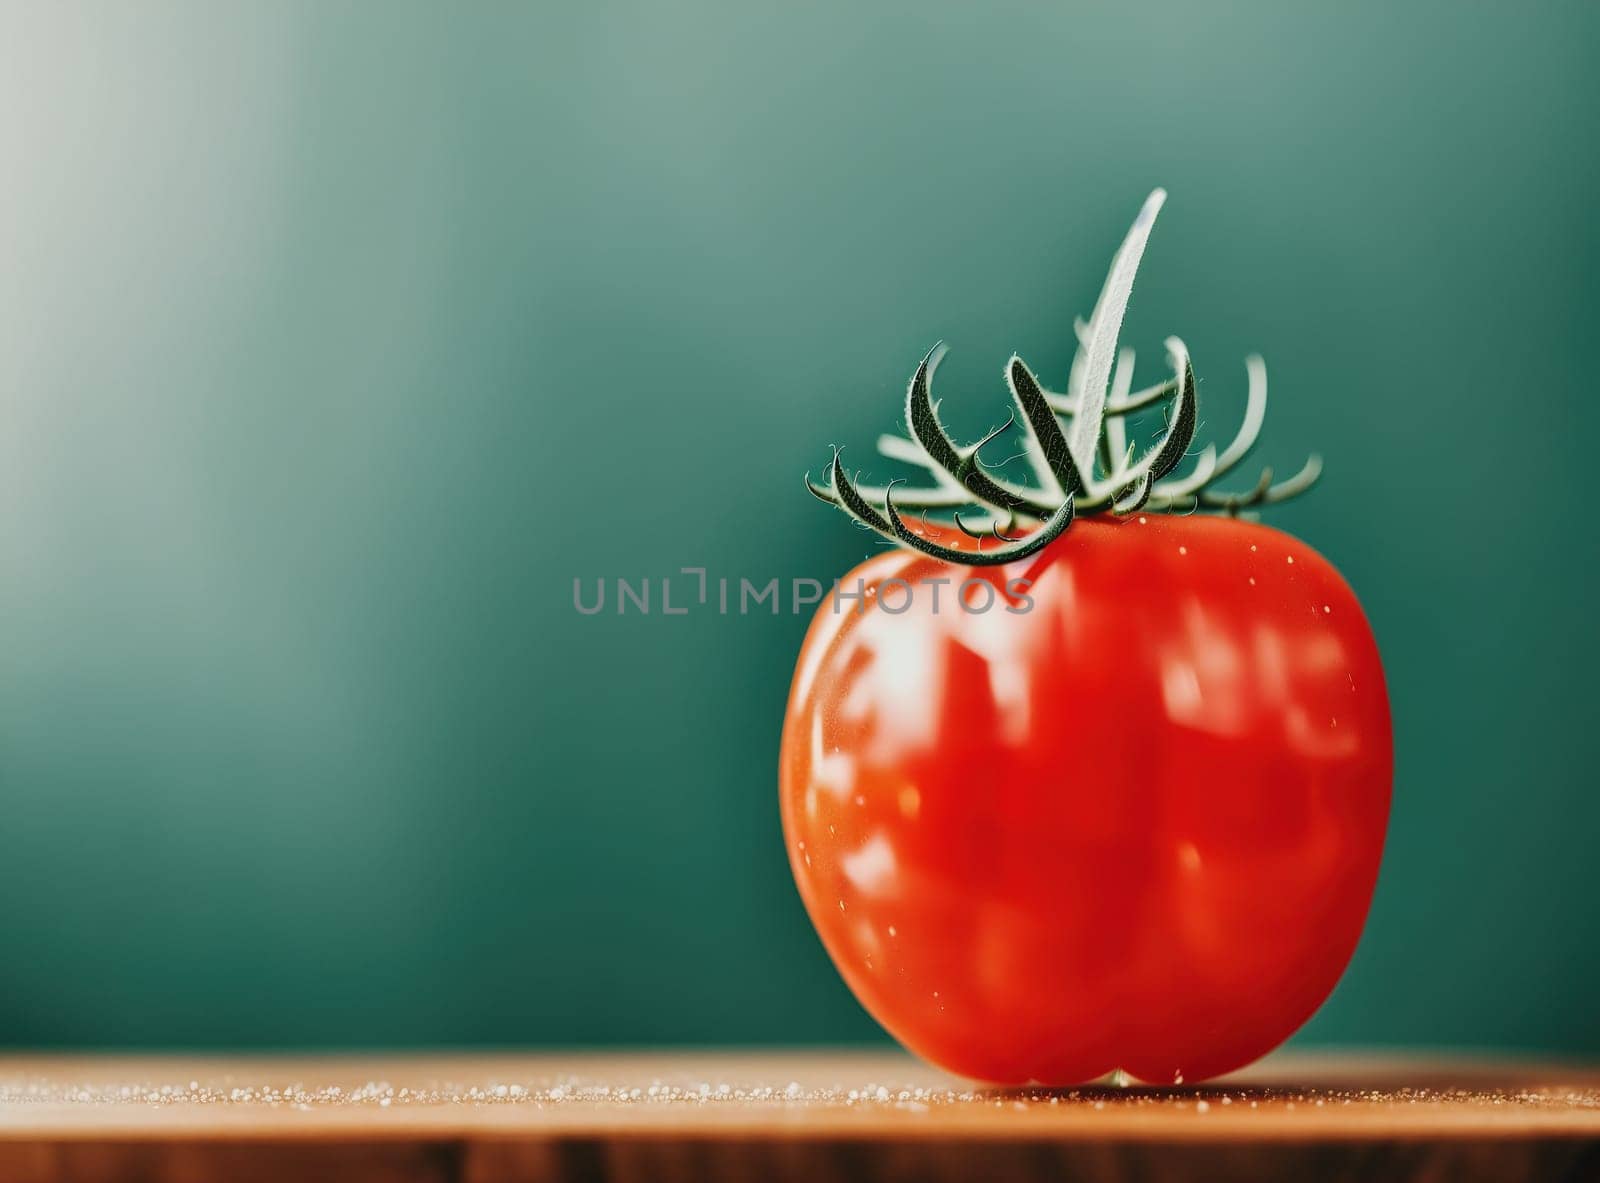 The image shows a red tomato sitting on a wooden surface, with a green background.